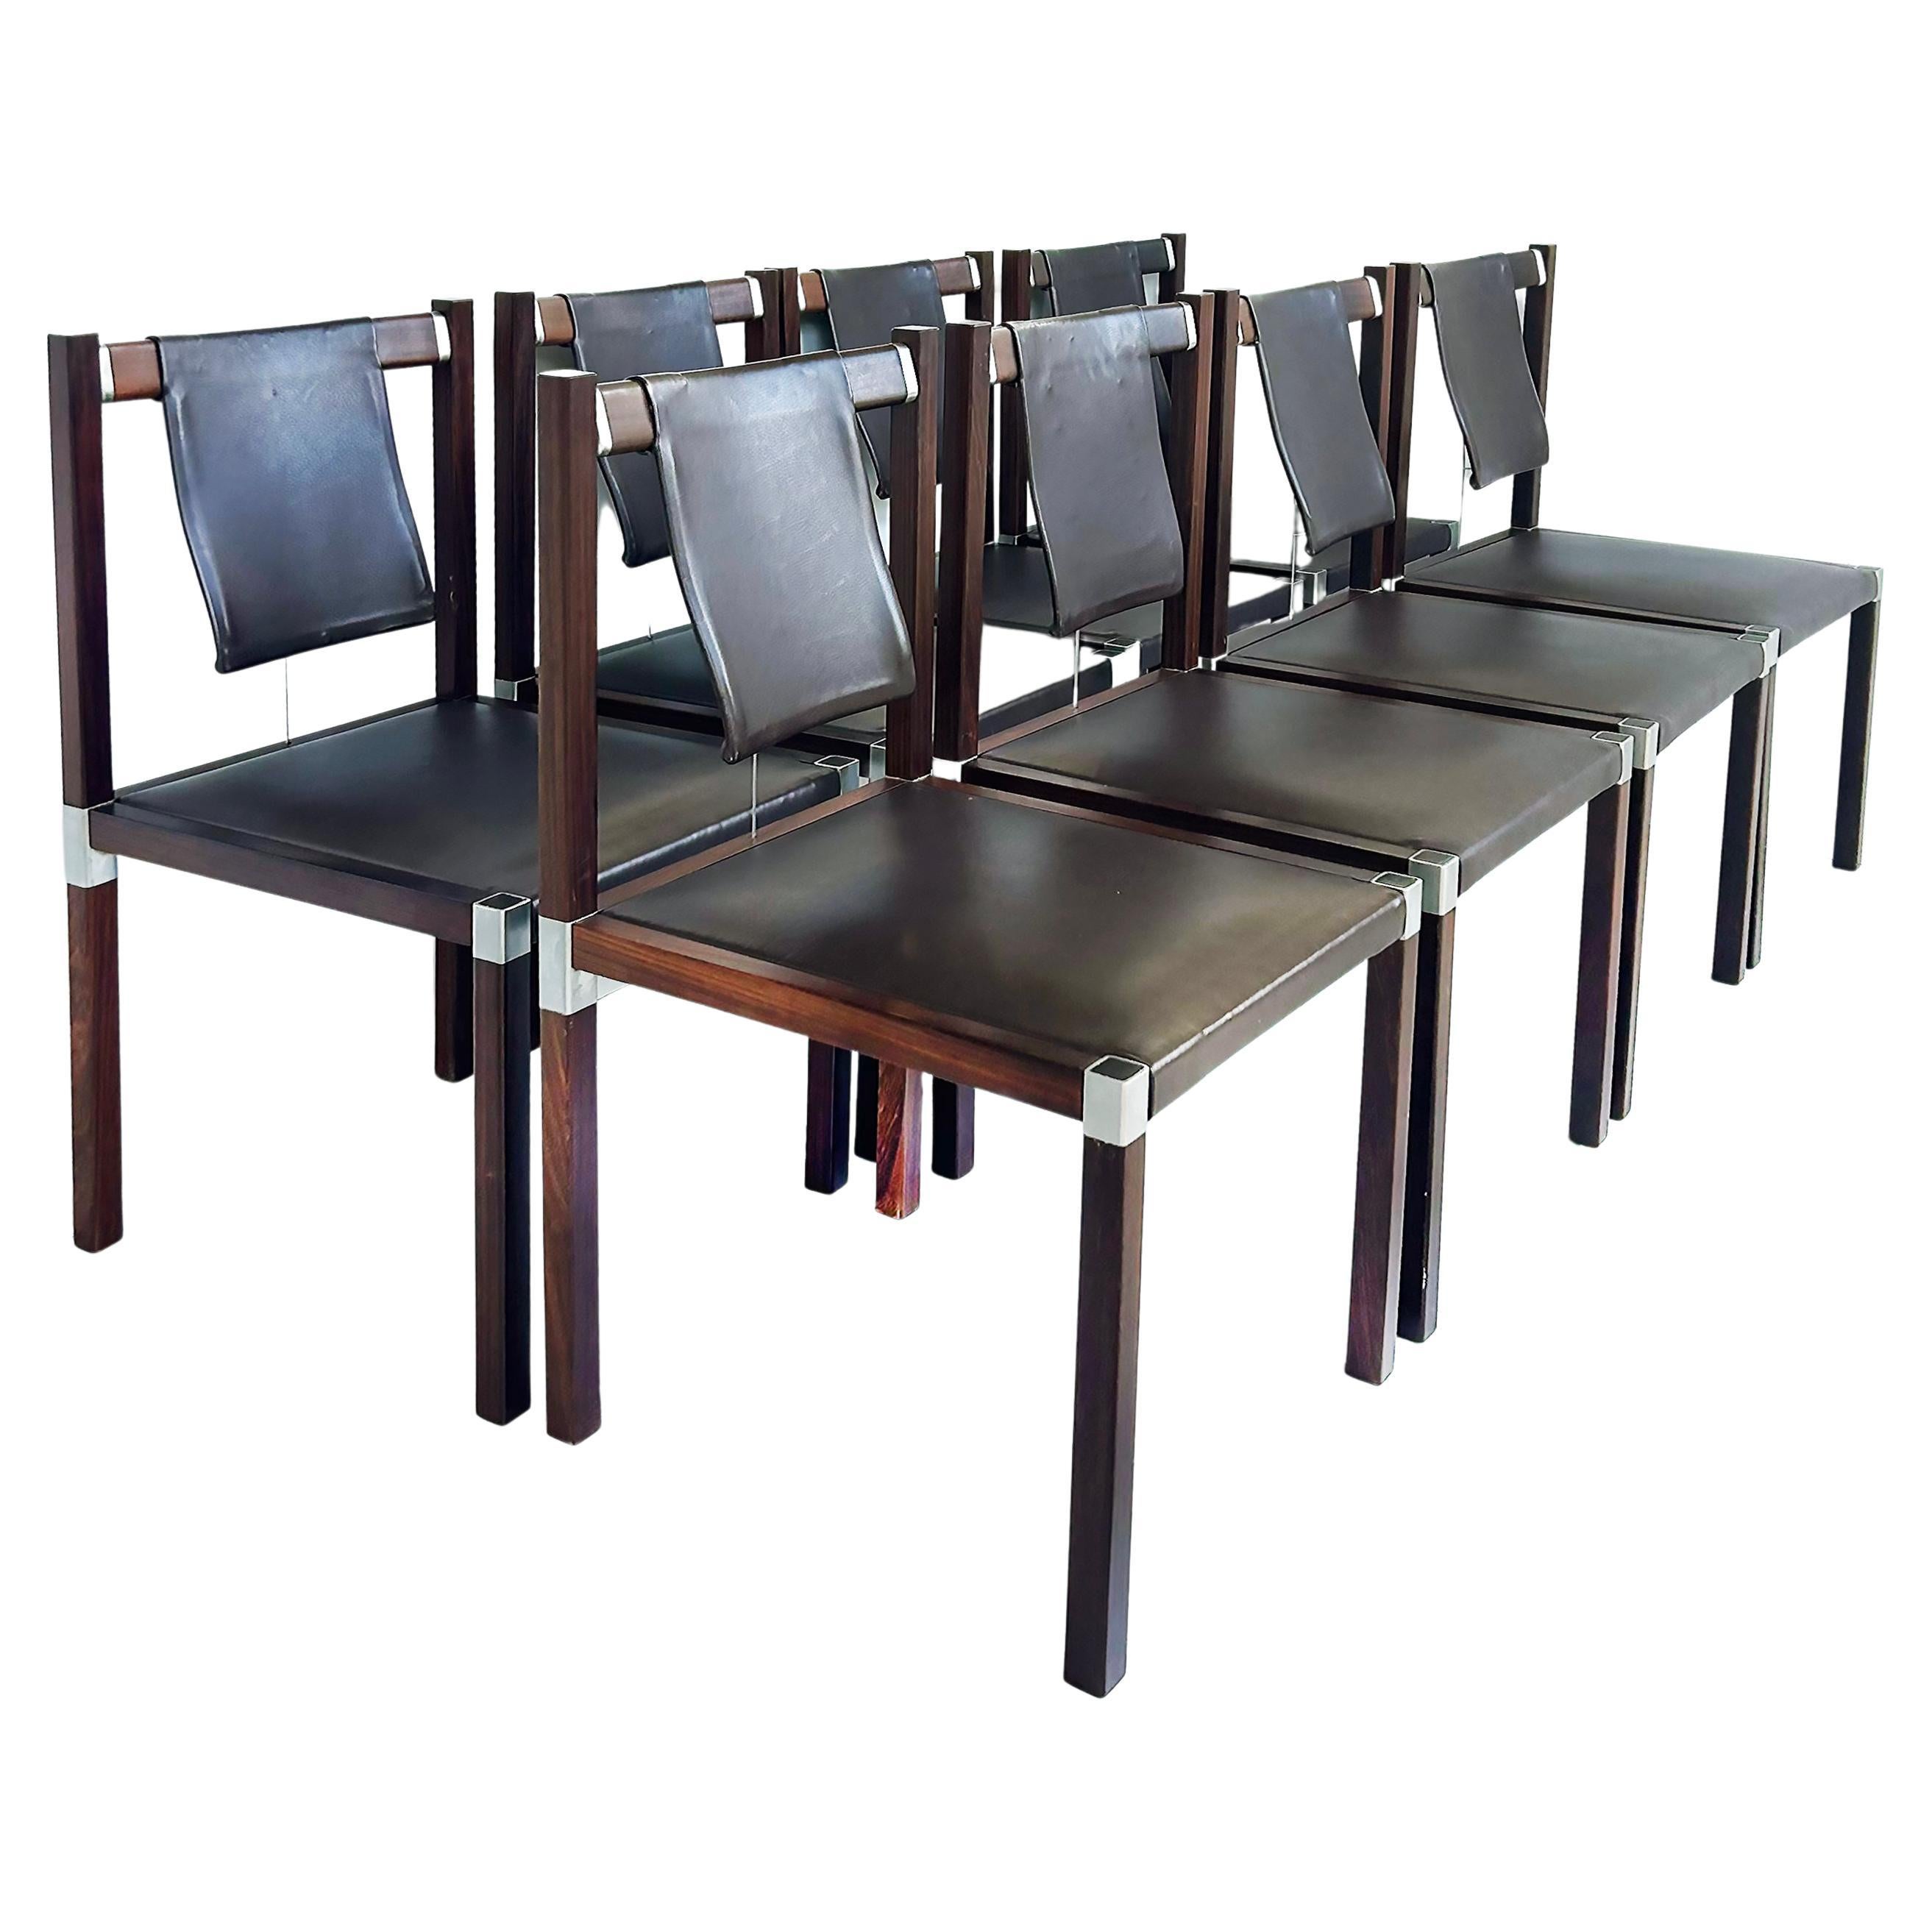 Zele "Marcus & Alexis" Dining Chairs in Leather, Stainless and Wood, Set of 8 For Sale